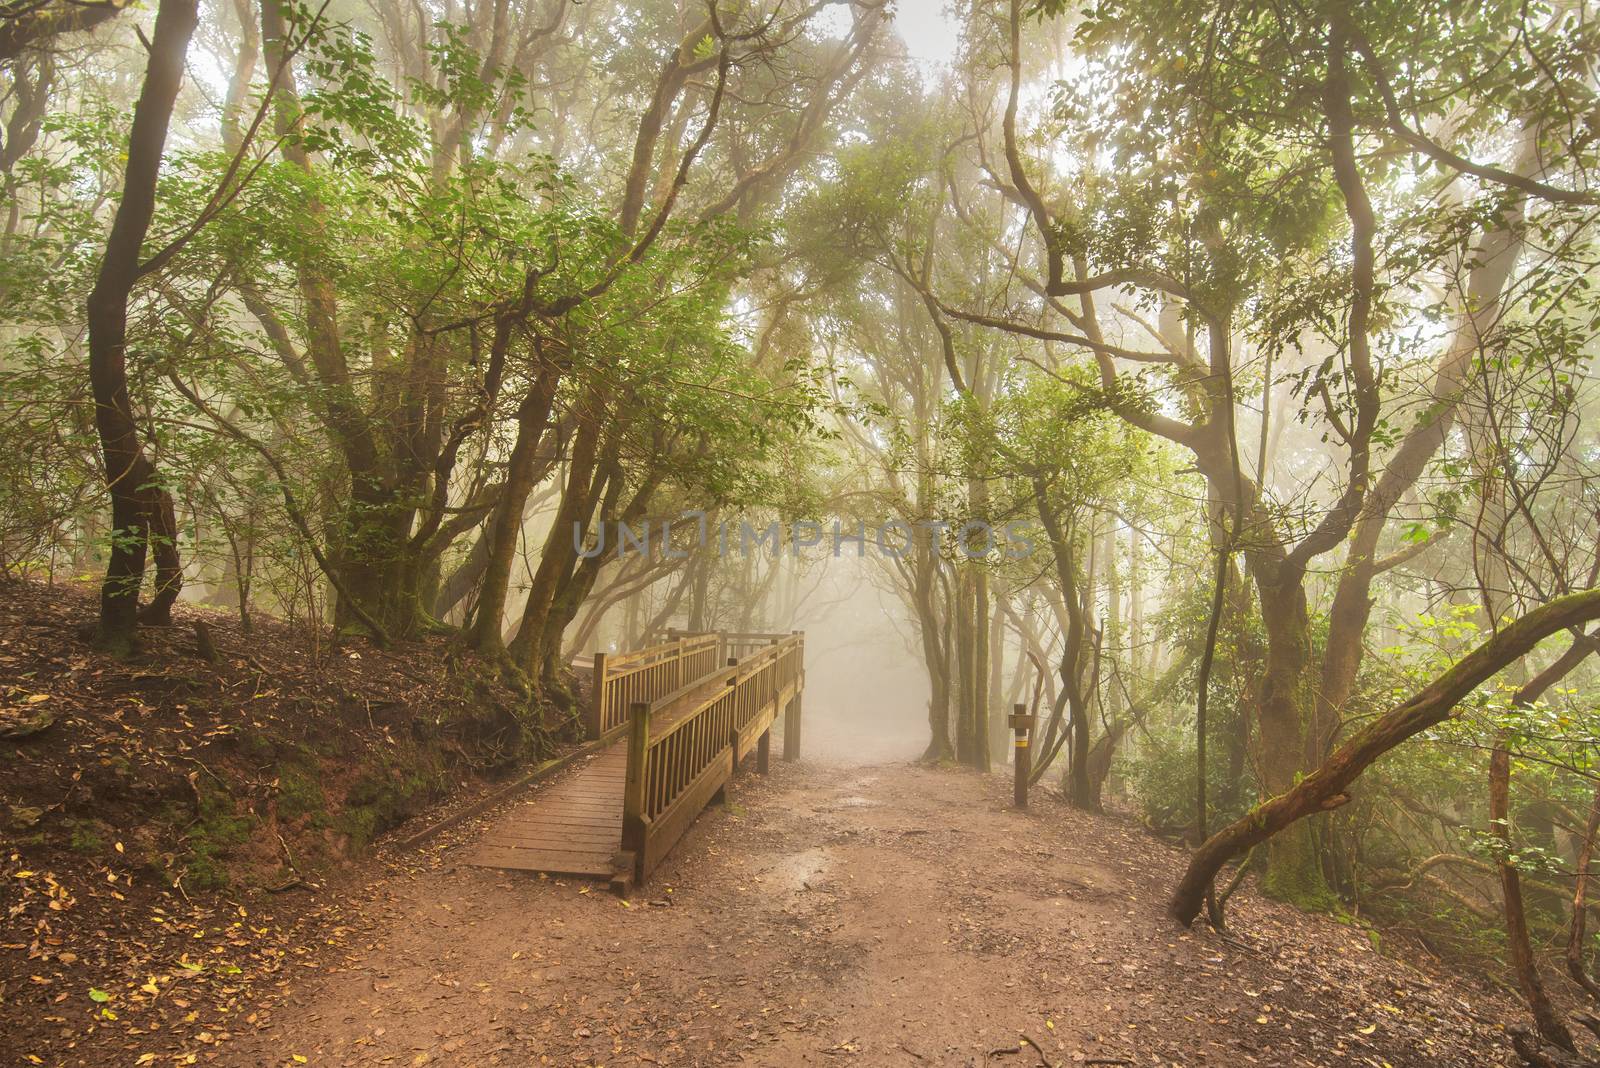 Misty forest in Anaga mountains, Tenerife, Canary island, Spain.